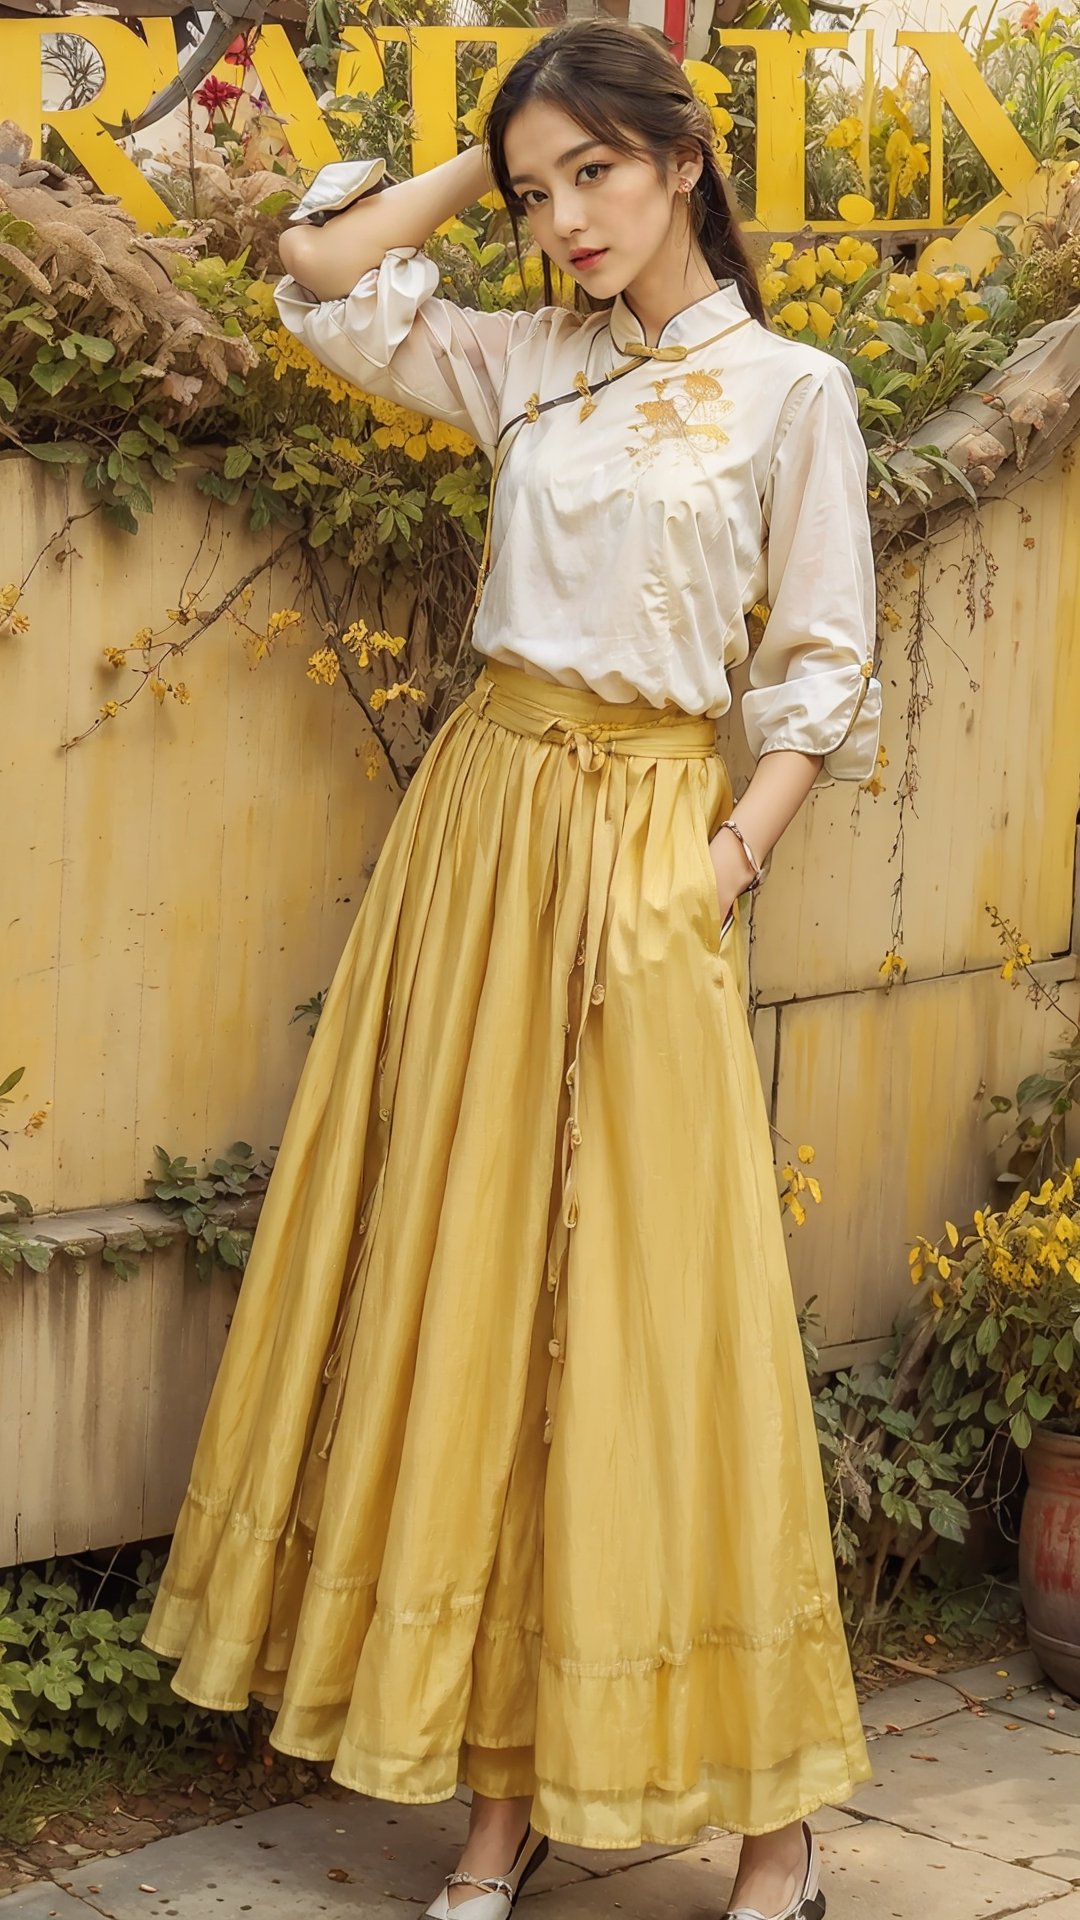 extreme detailed, (masterpiece), (top quality), (best quality), (official art), (beautiful and aesthetic:1.2), (stylish pose), (1 woman), (fractal art:1.3), (colorful), (amber-yellow theme: 1.2), ppcp,long skirt,perfect,ChineseWatercolorPainting, magazine cover,